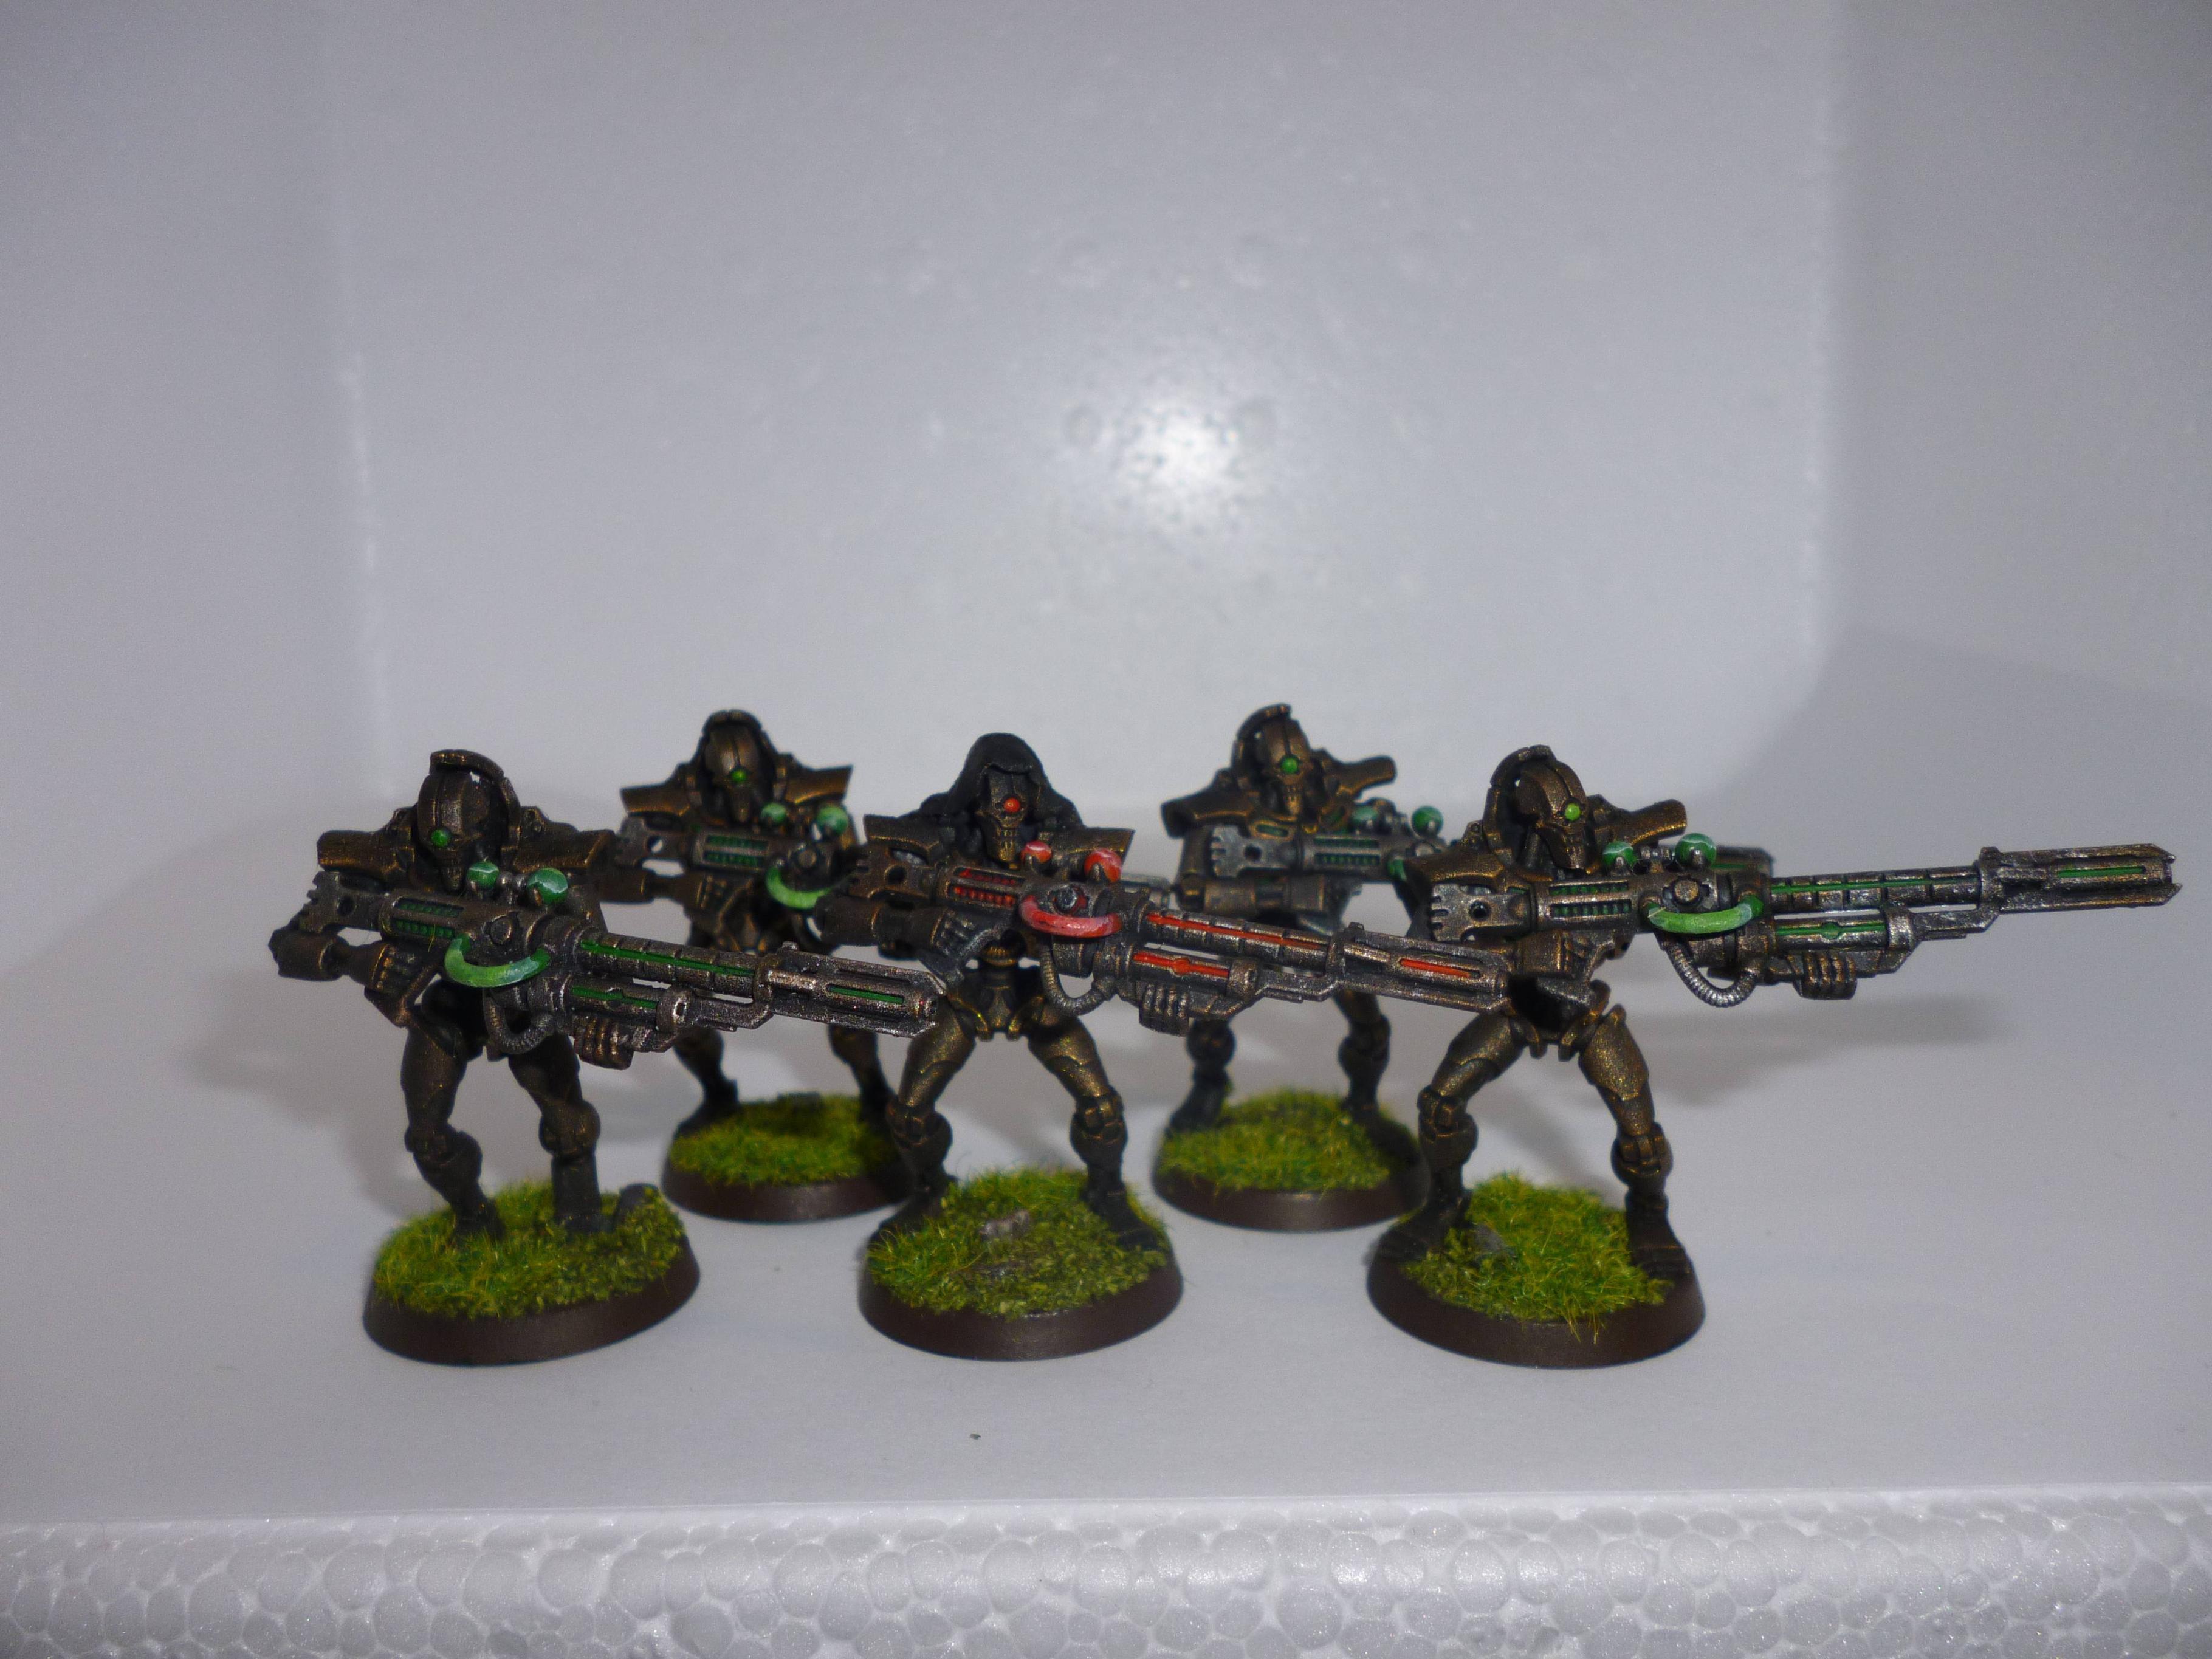 Big, Bronzecrons, Crons, Death, Deathmarks, Marks, Necrons, Red, Rust